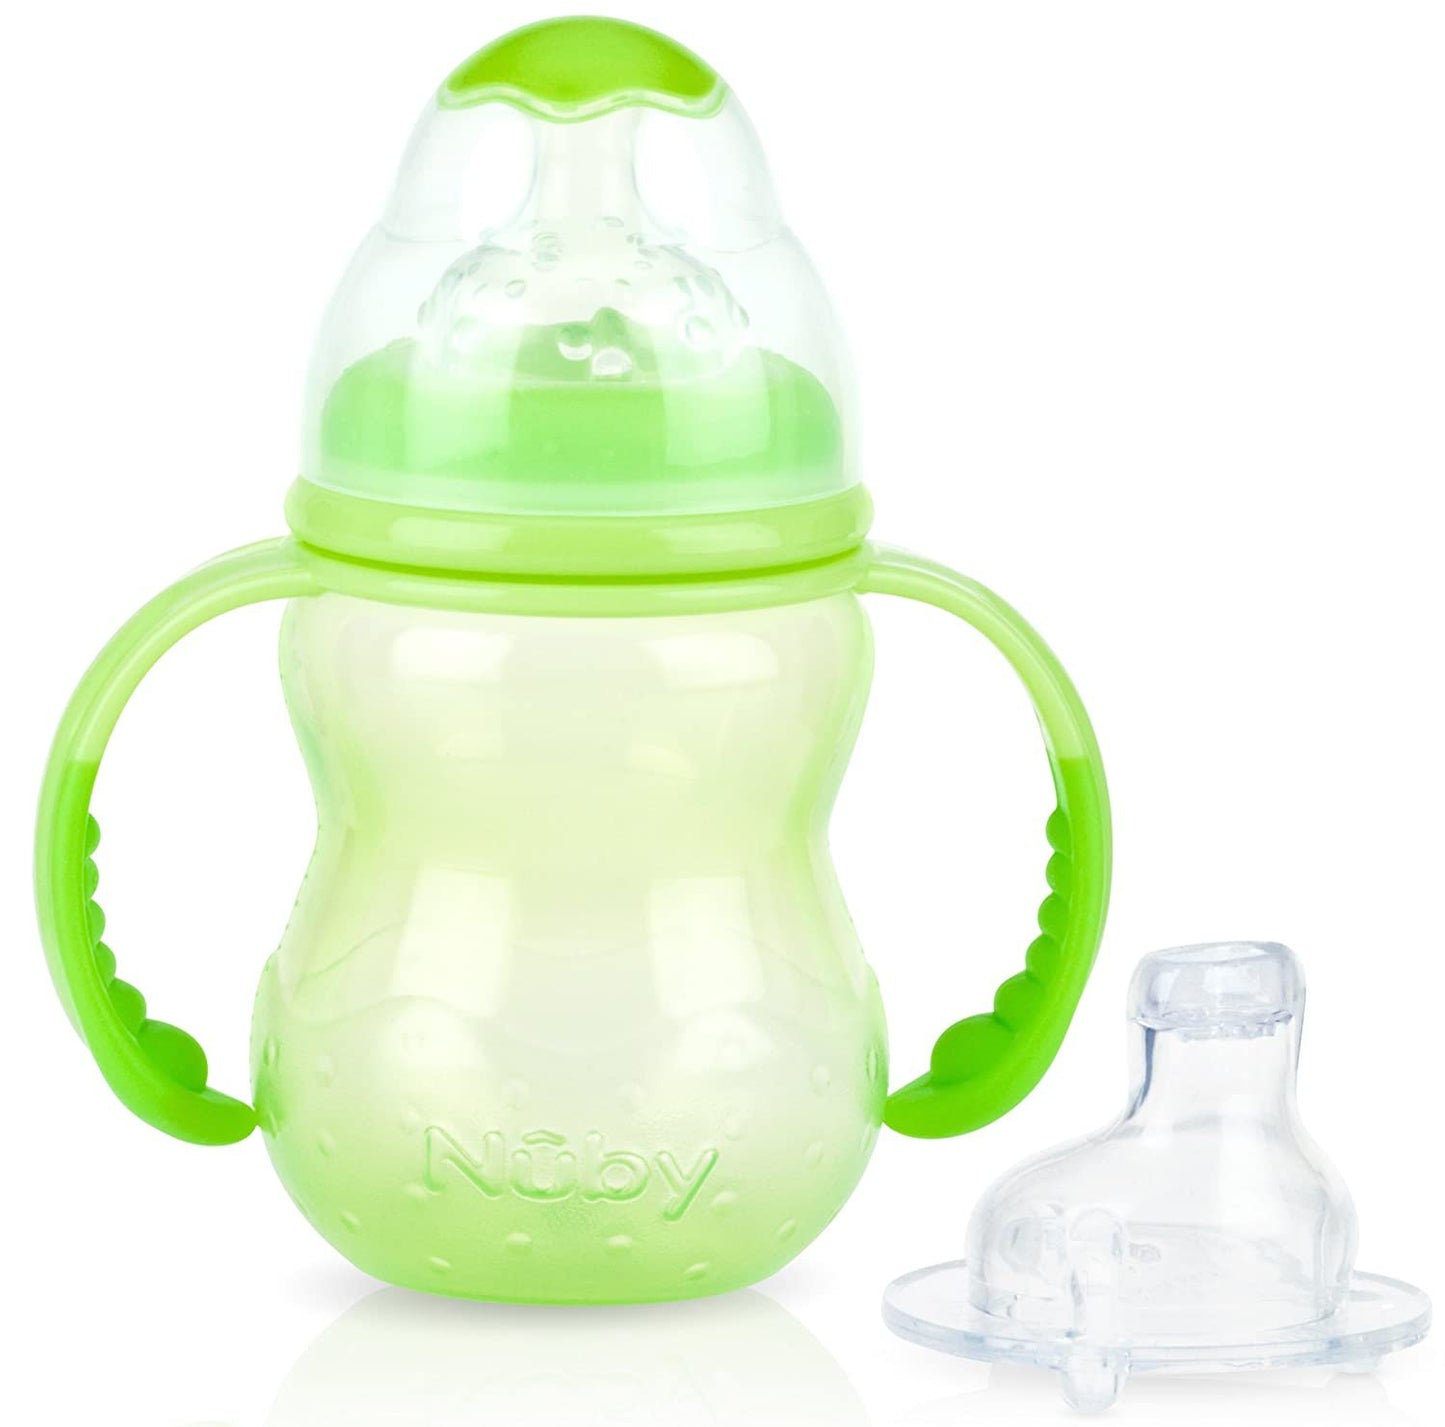 Nuby 3-Stage Wide Neck No Spill Bottle with Handles And Non-Drip Juice Spout, 3 Months, 8 Ounce, Teal